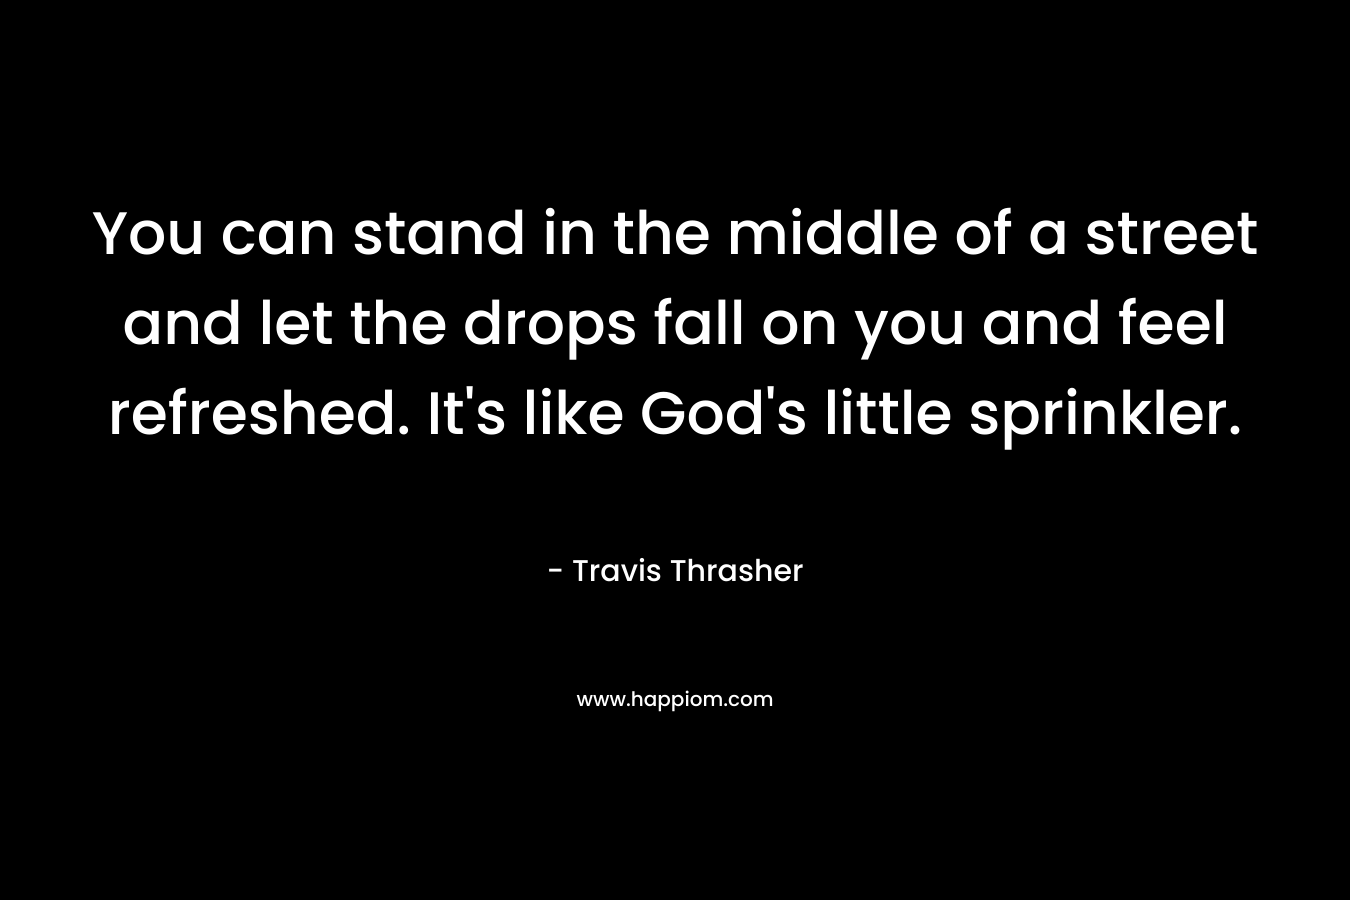 You can stand in the middle of a street and let the drops fall on you and feel refreshed. It’s like God’s little sprinkler. – Travis Thrasher